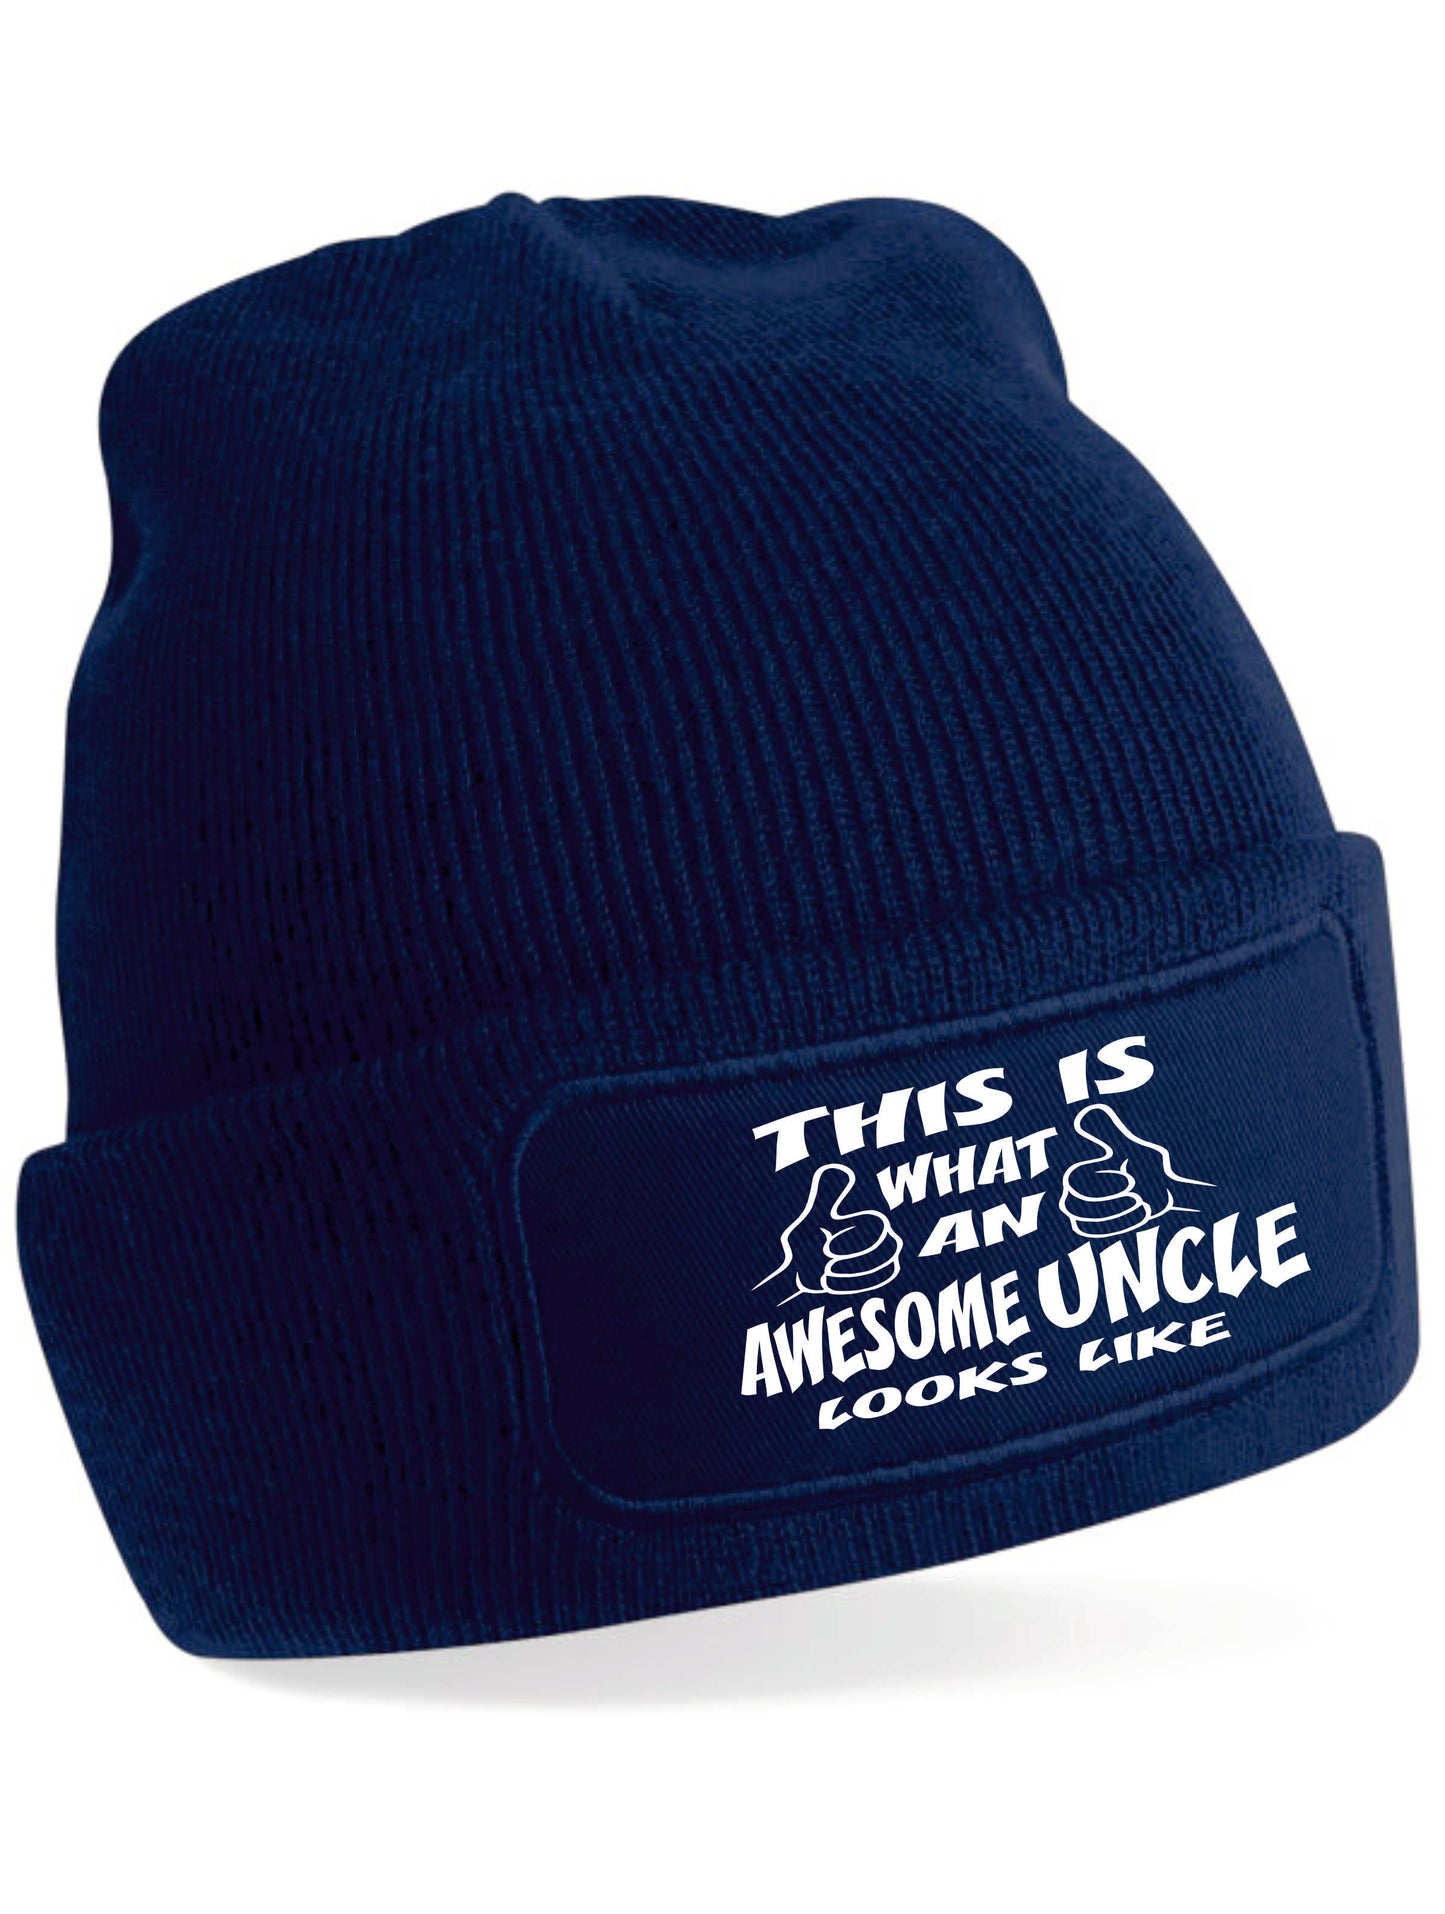 This Is What Awesome Uncle Looks Like Beanie Birthday Gift Great For Men